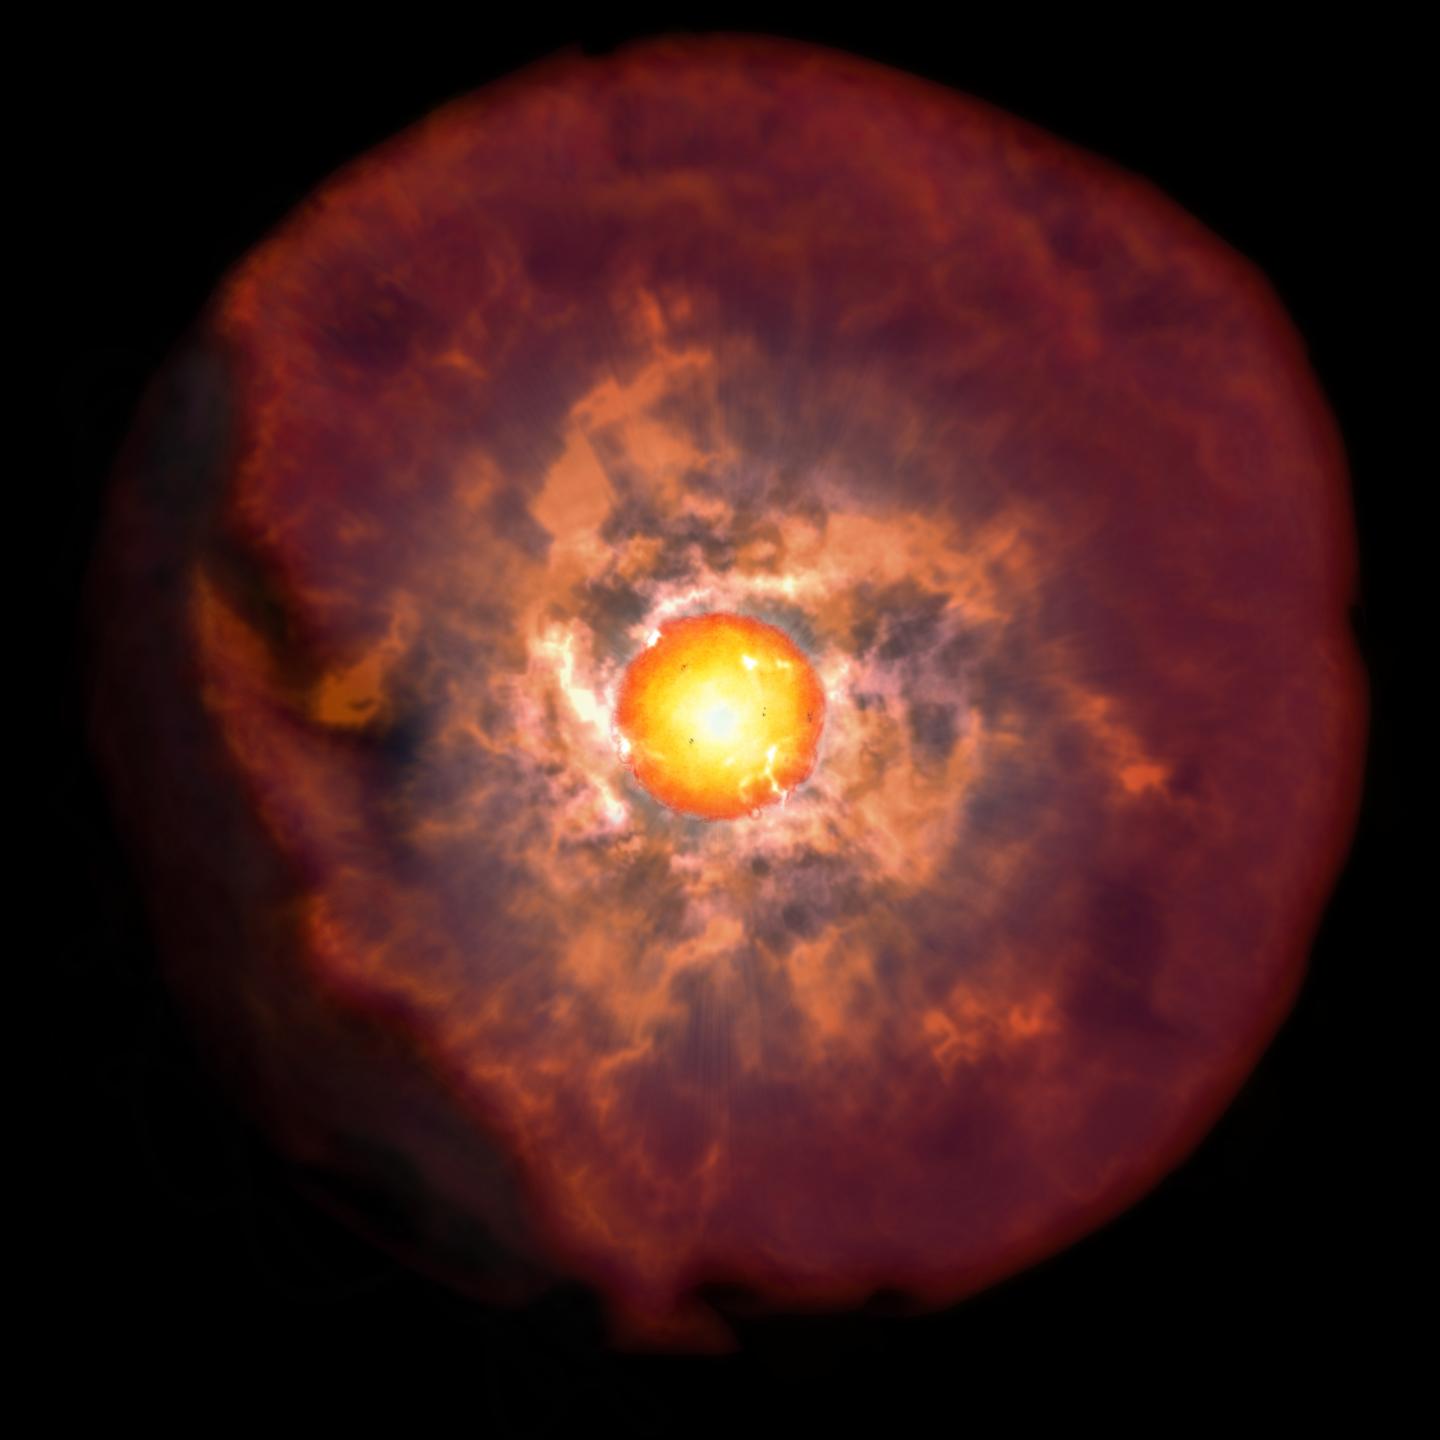 ARTISTIC IMPRESSION OF A RED SUPERGIANT STAR